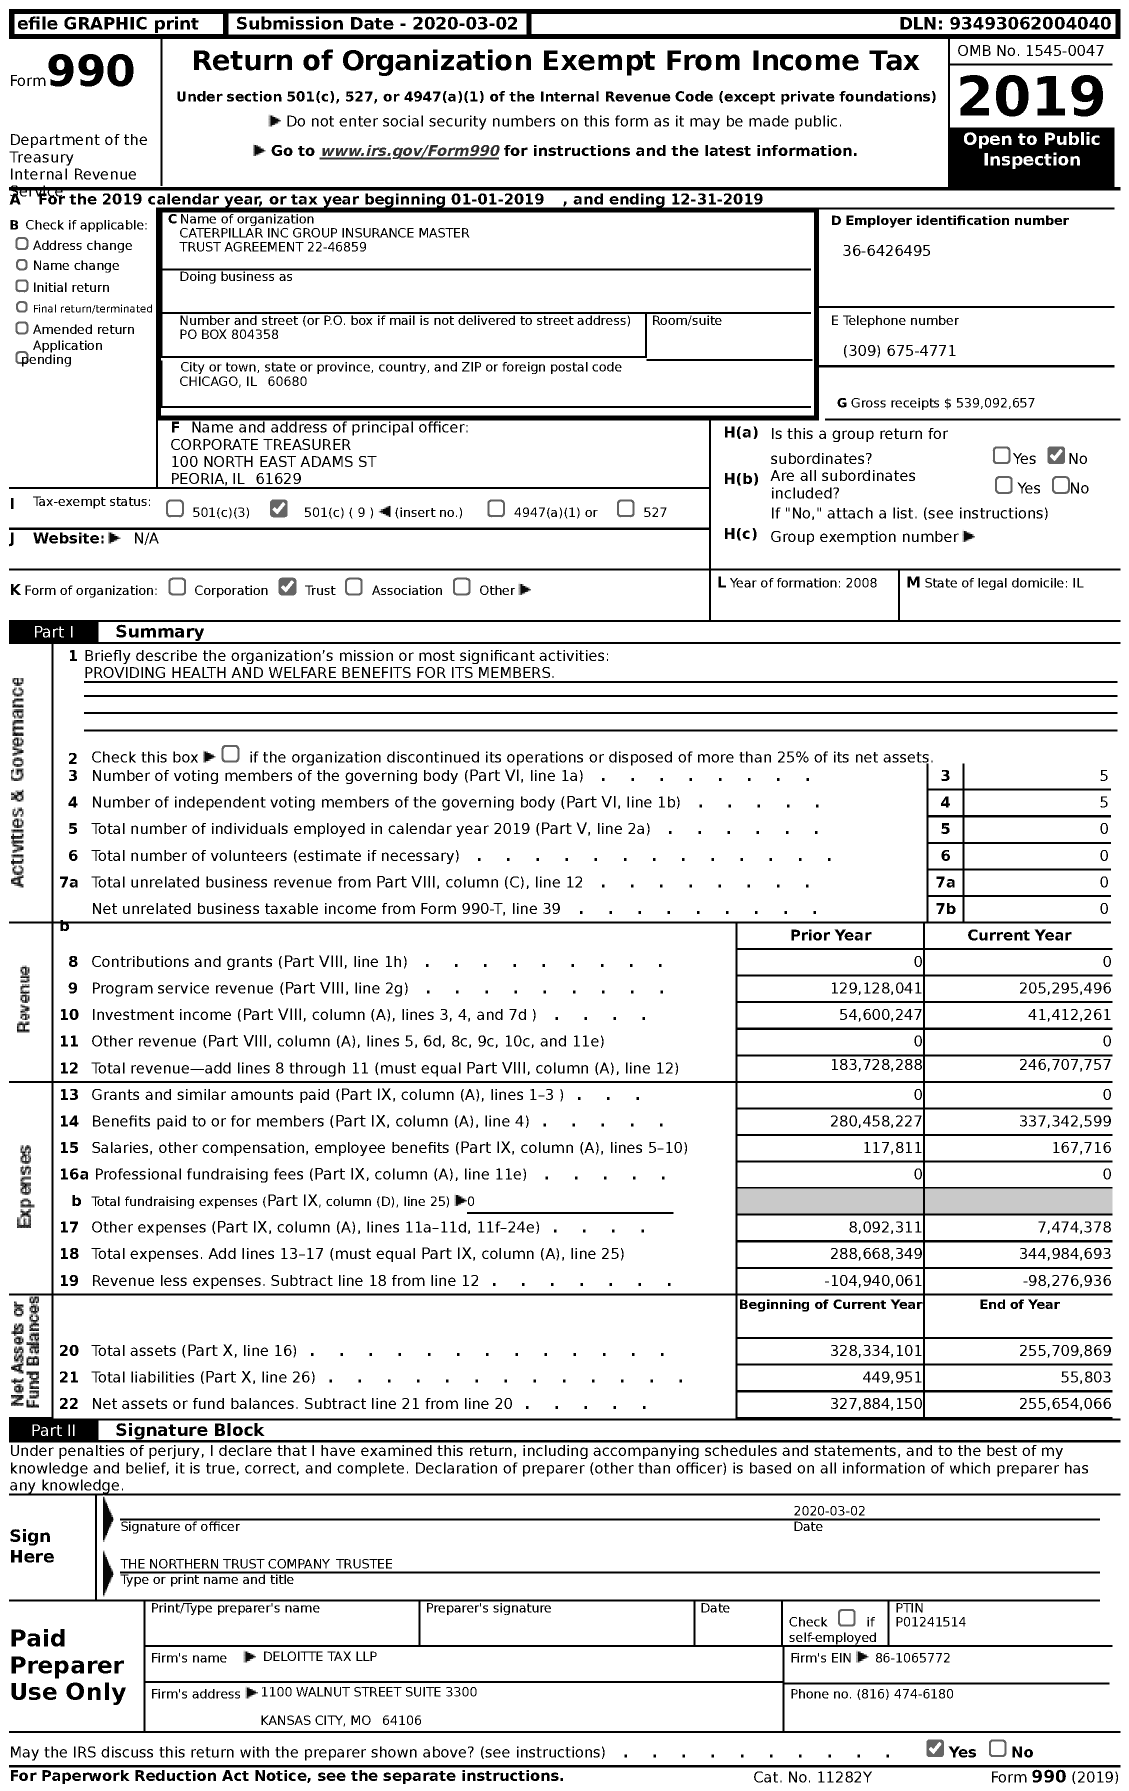 Image of first page of 2019 Form 990 for Caterpillar Inc. Group Insurance Master Trust Agreement